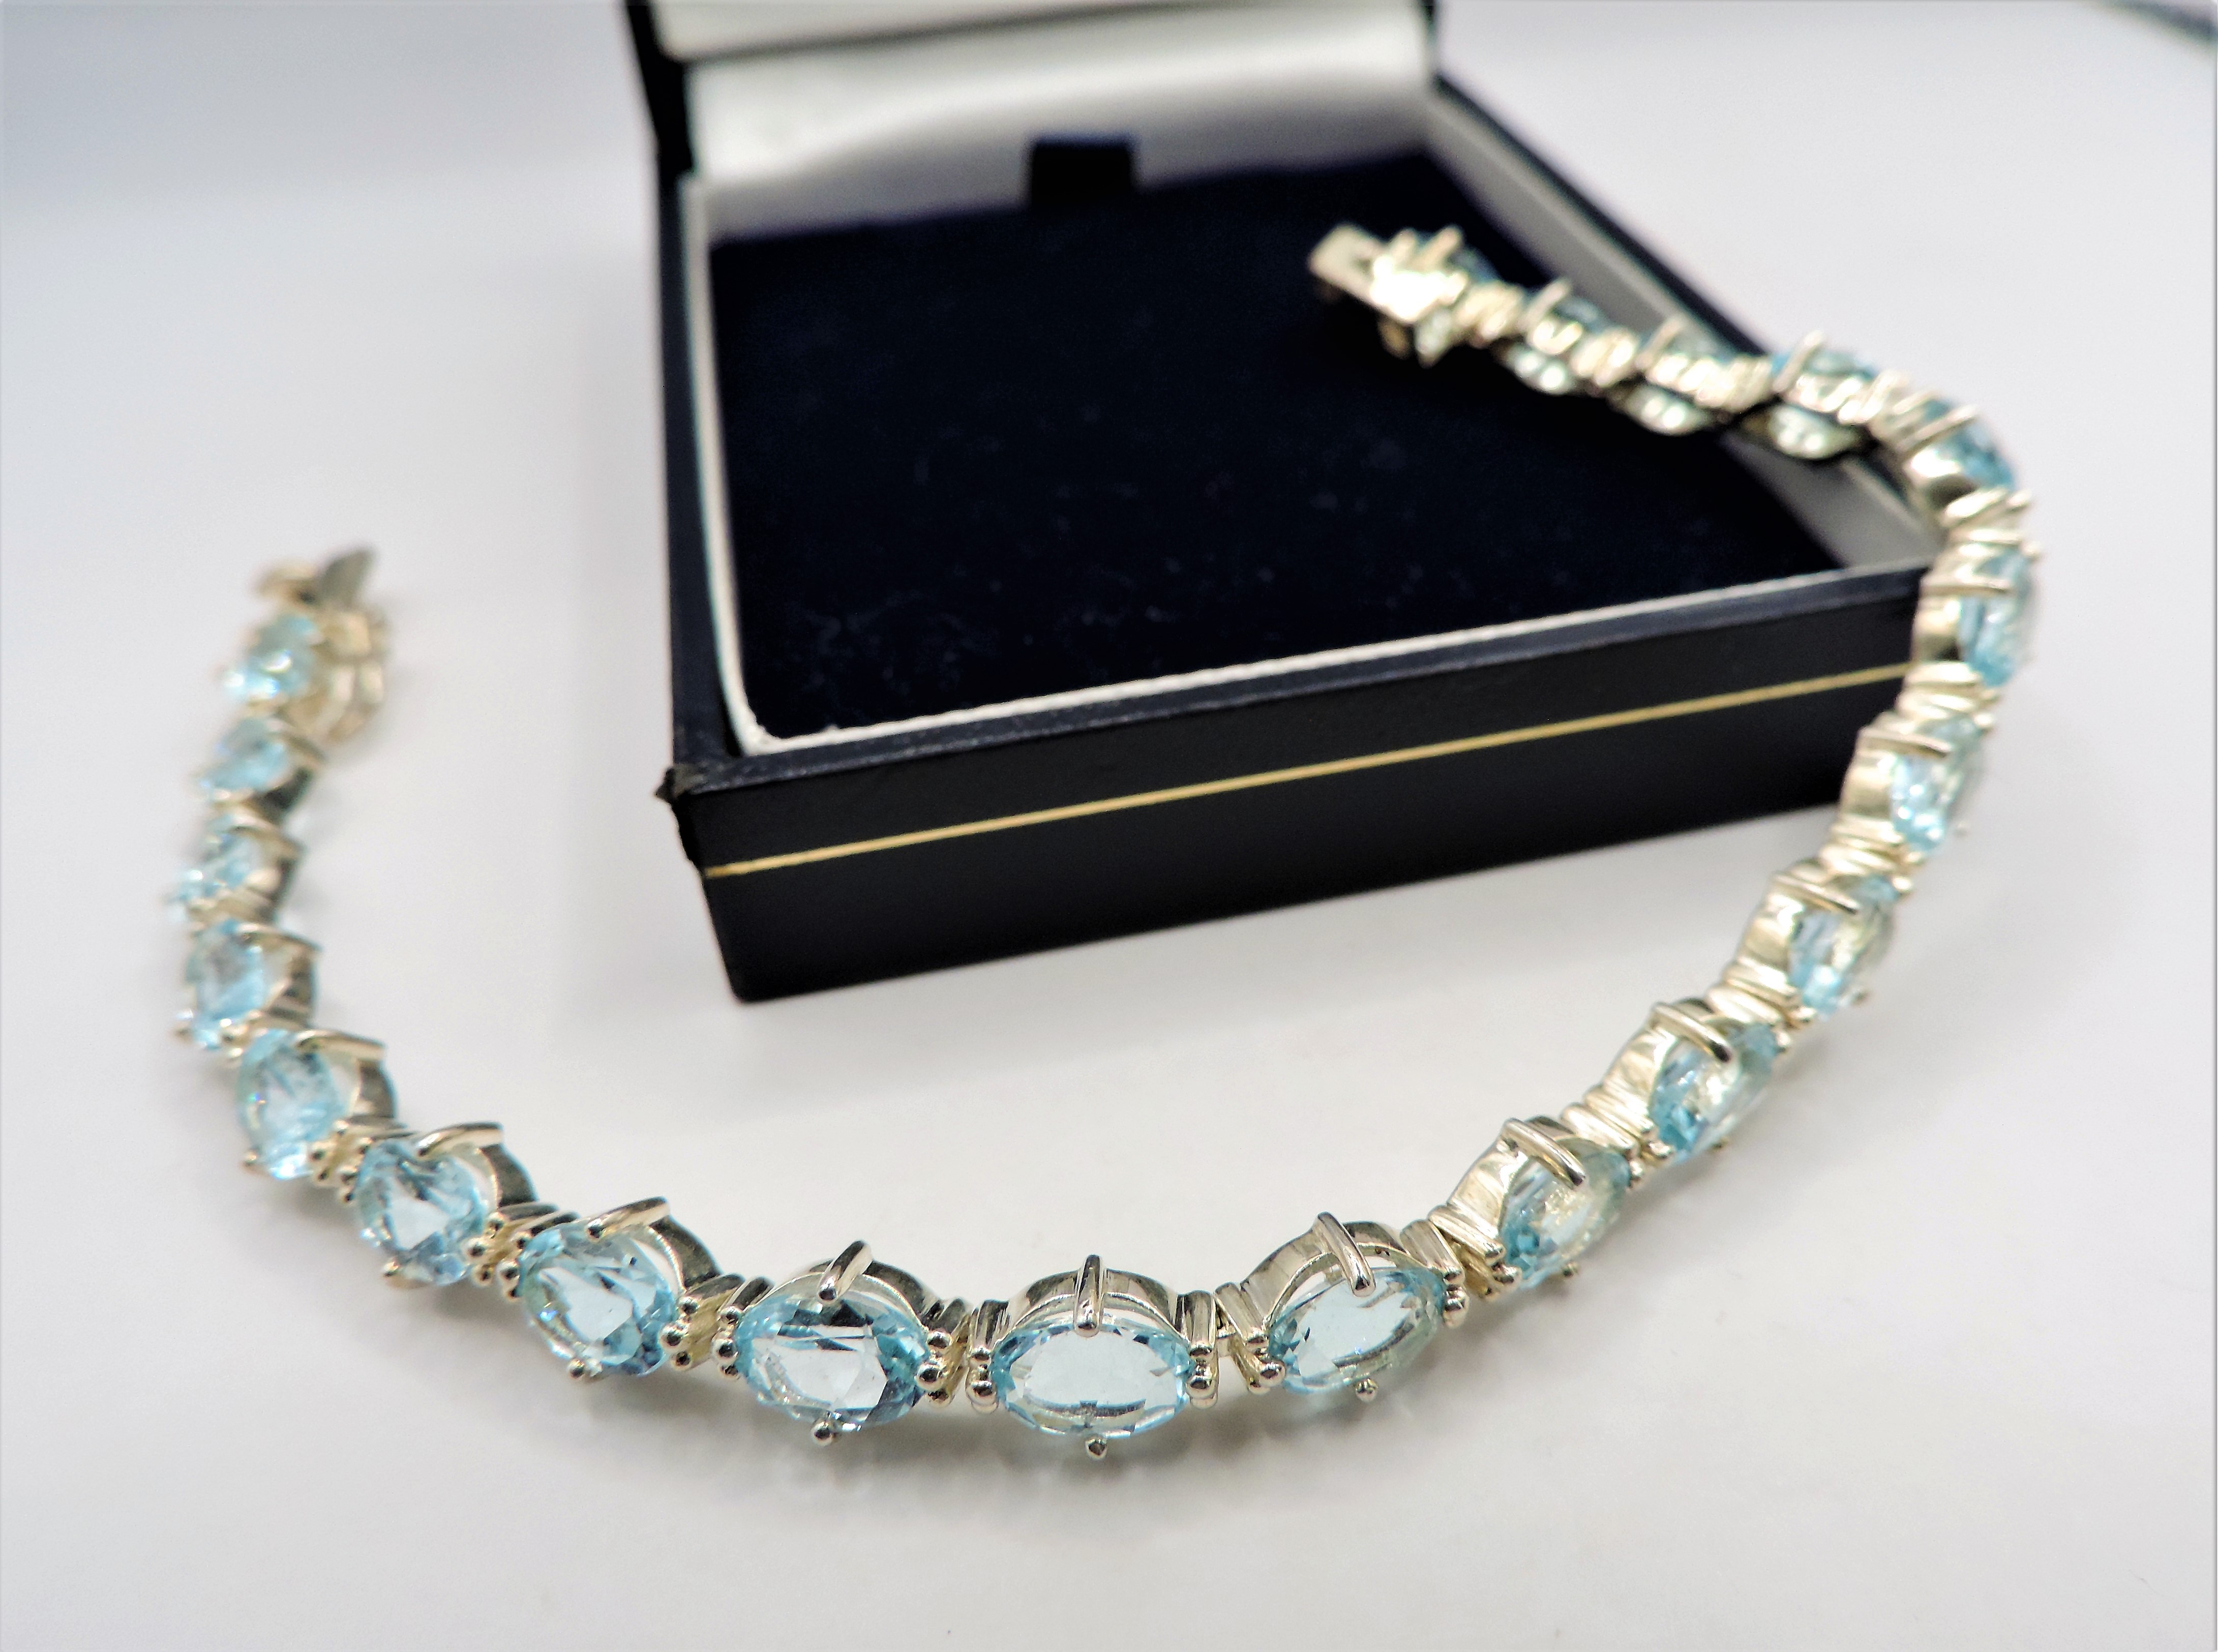 Sterling Silver 22CT Blue Topaz Bracelet 'New' with Gift Box - Image 2 of 6